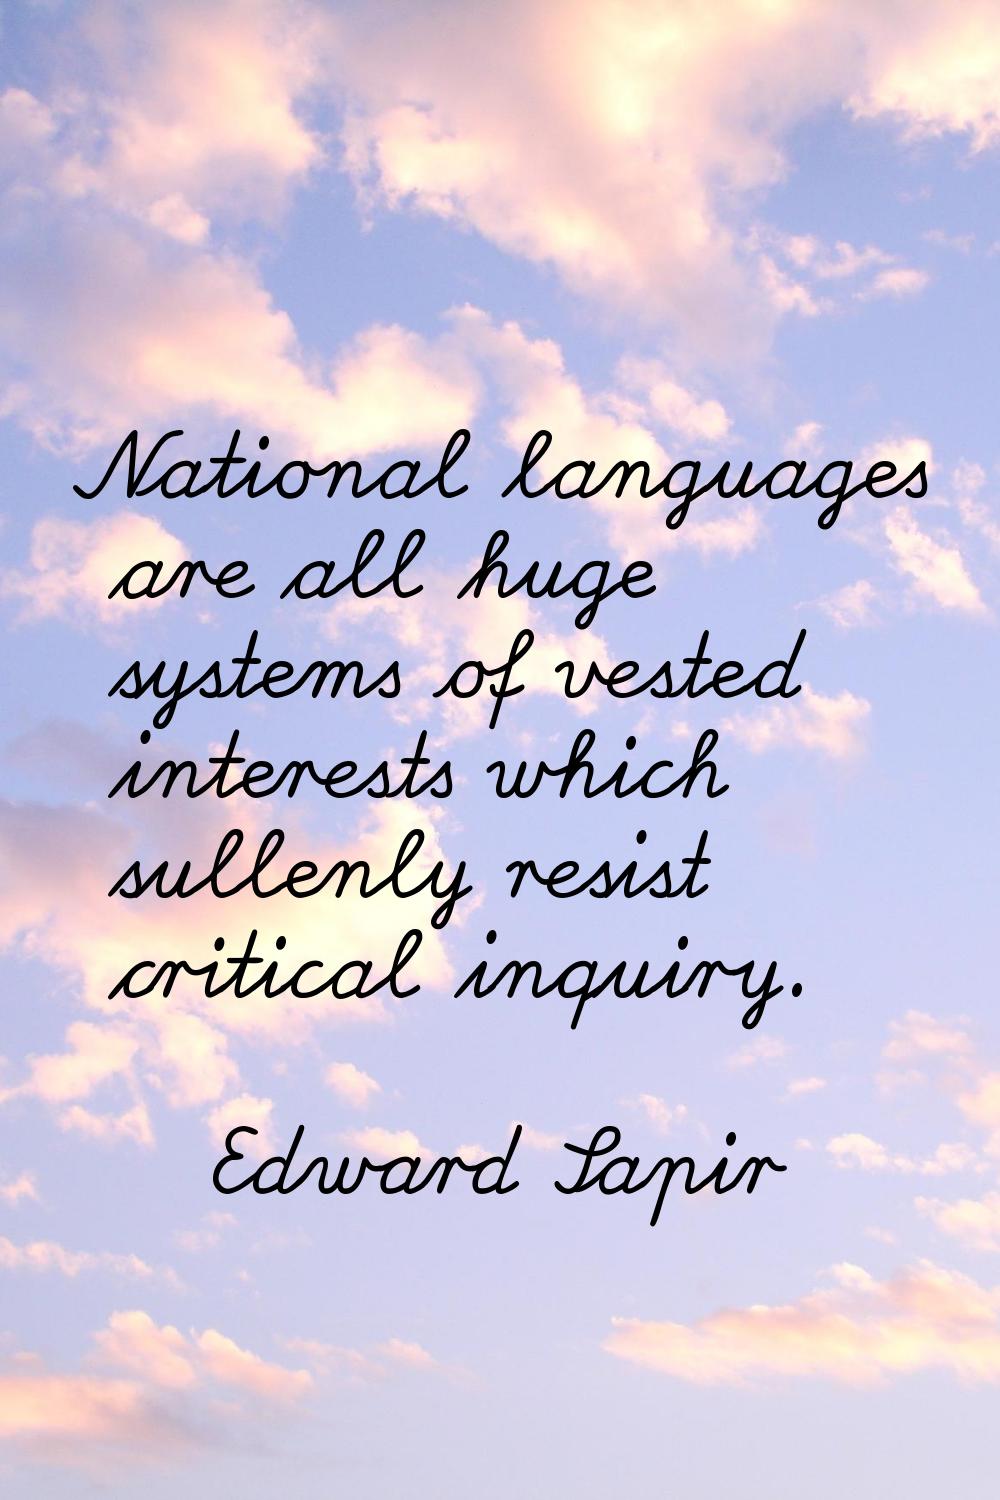 National languages are all huge systems of vested interests which sullenly resist critical inquiry.